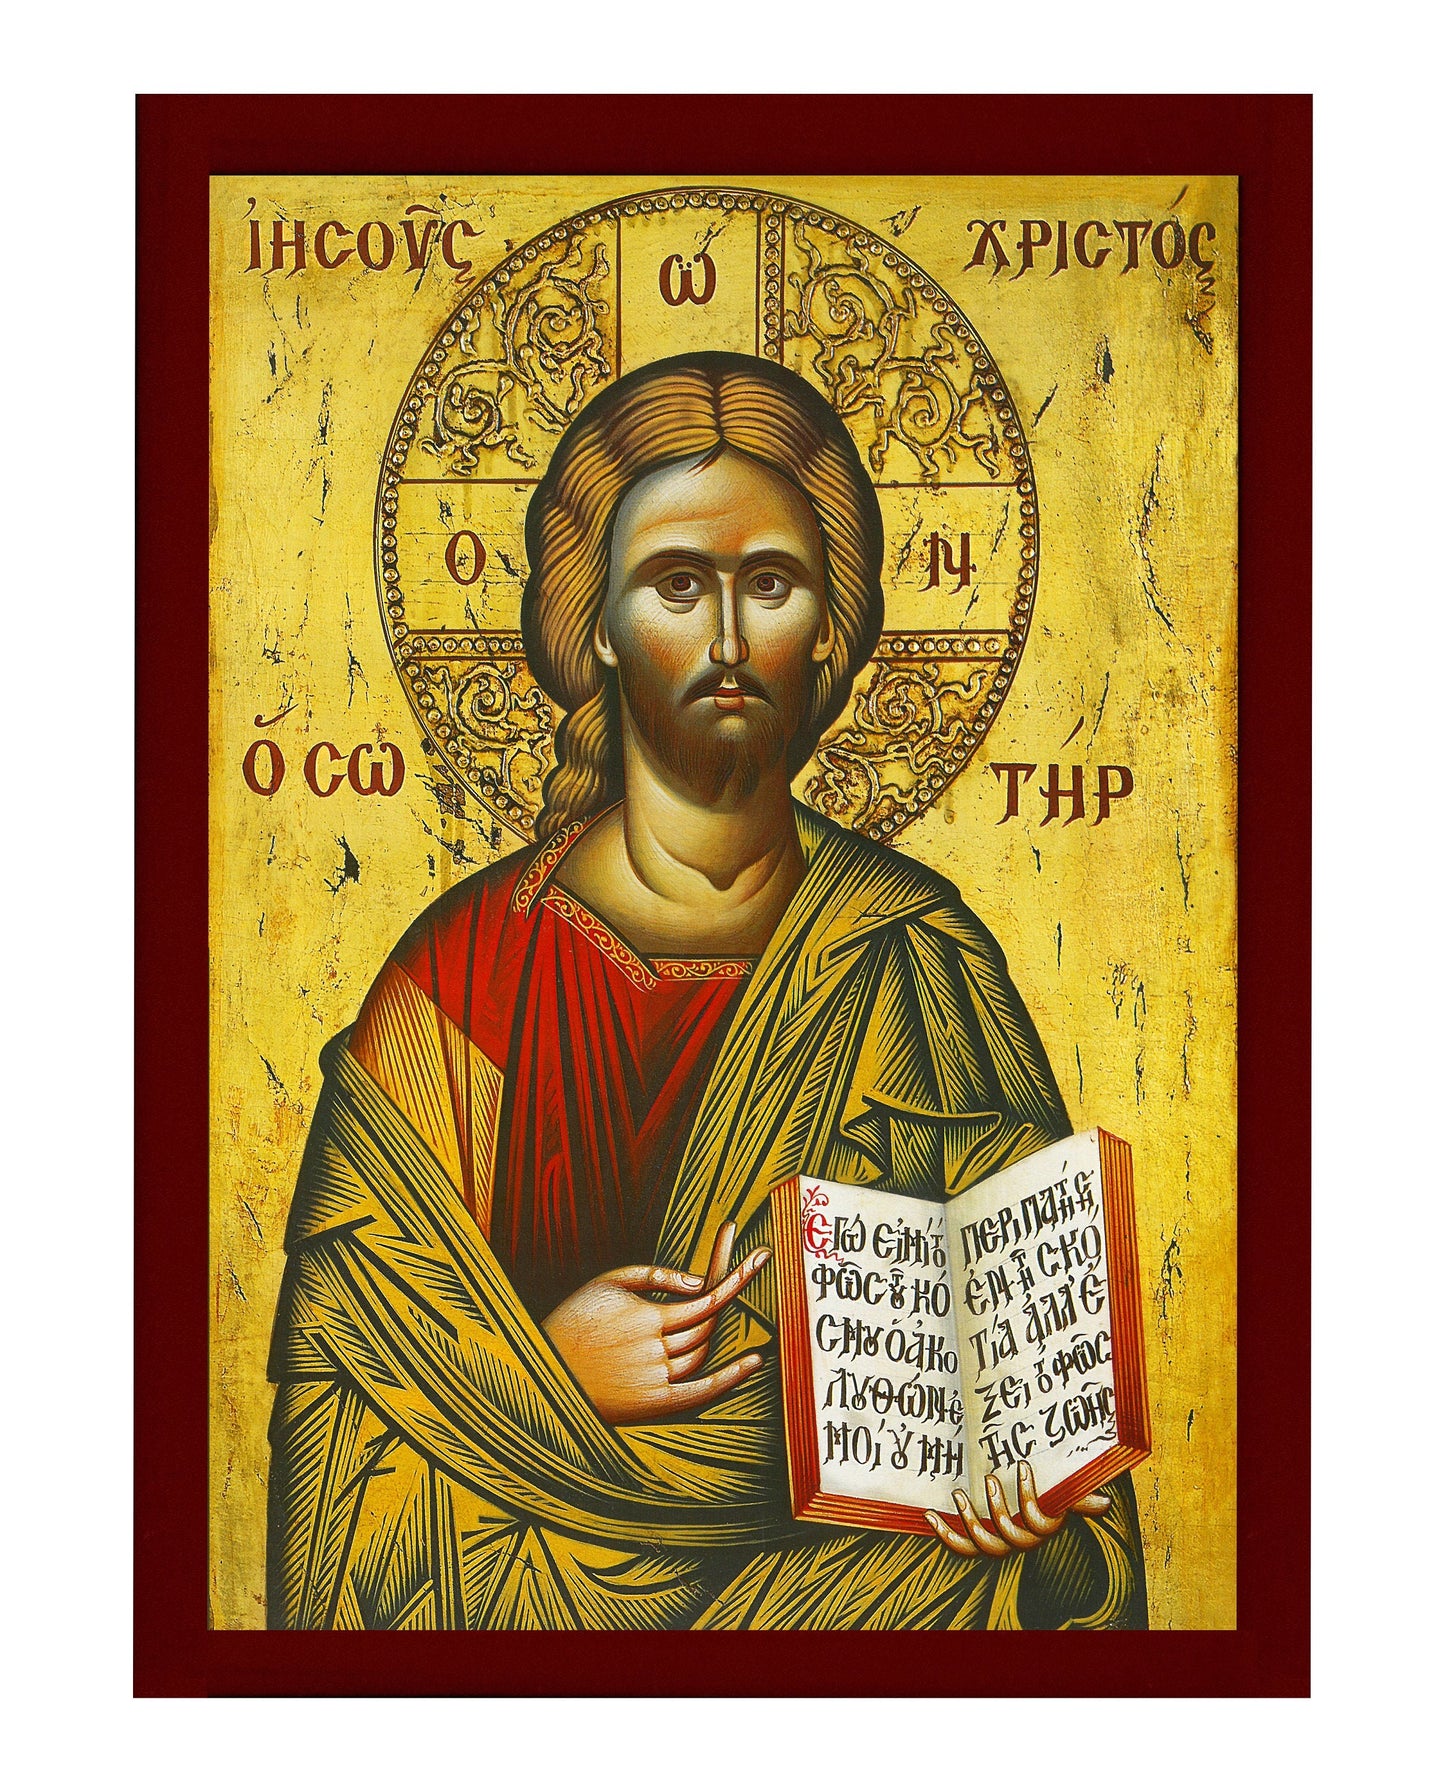 Jesus Christ icon, Handmade Greek Orthodox icon of our Lord, Byzantine art wall hanging on wood plaque, religious icon home decor TheHolyArt